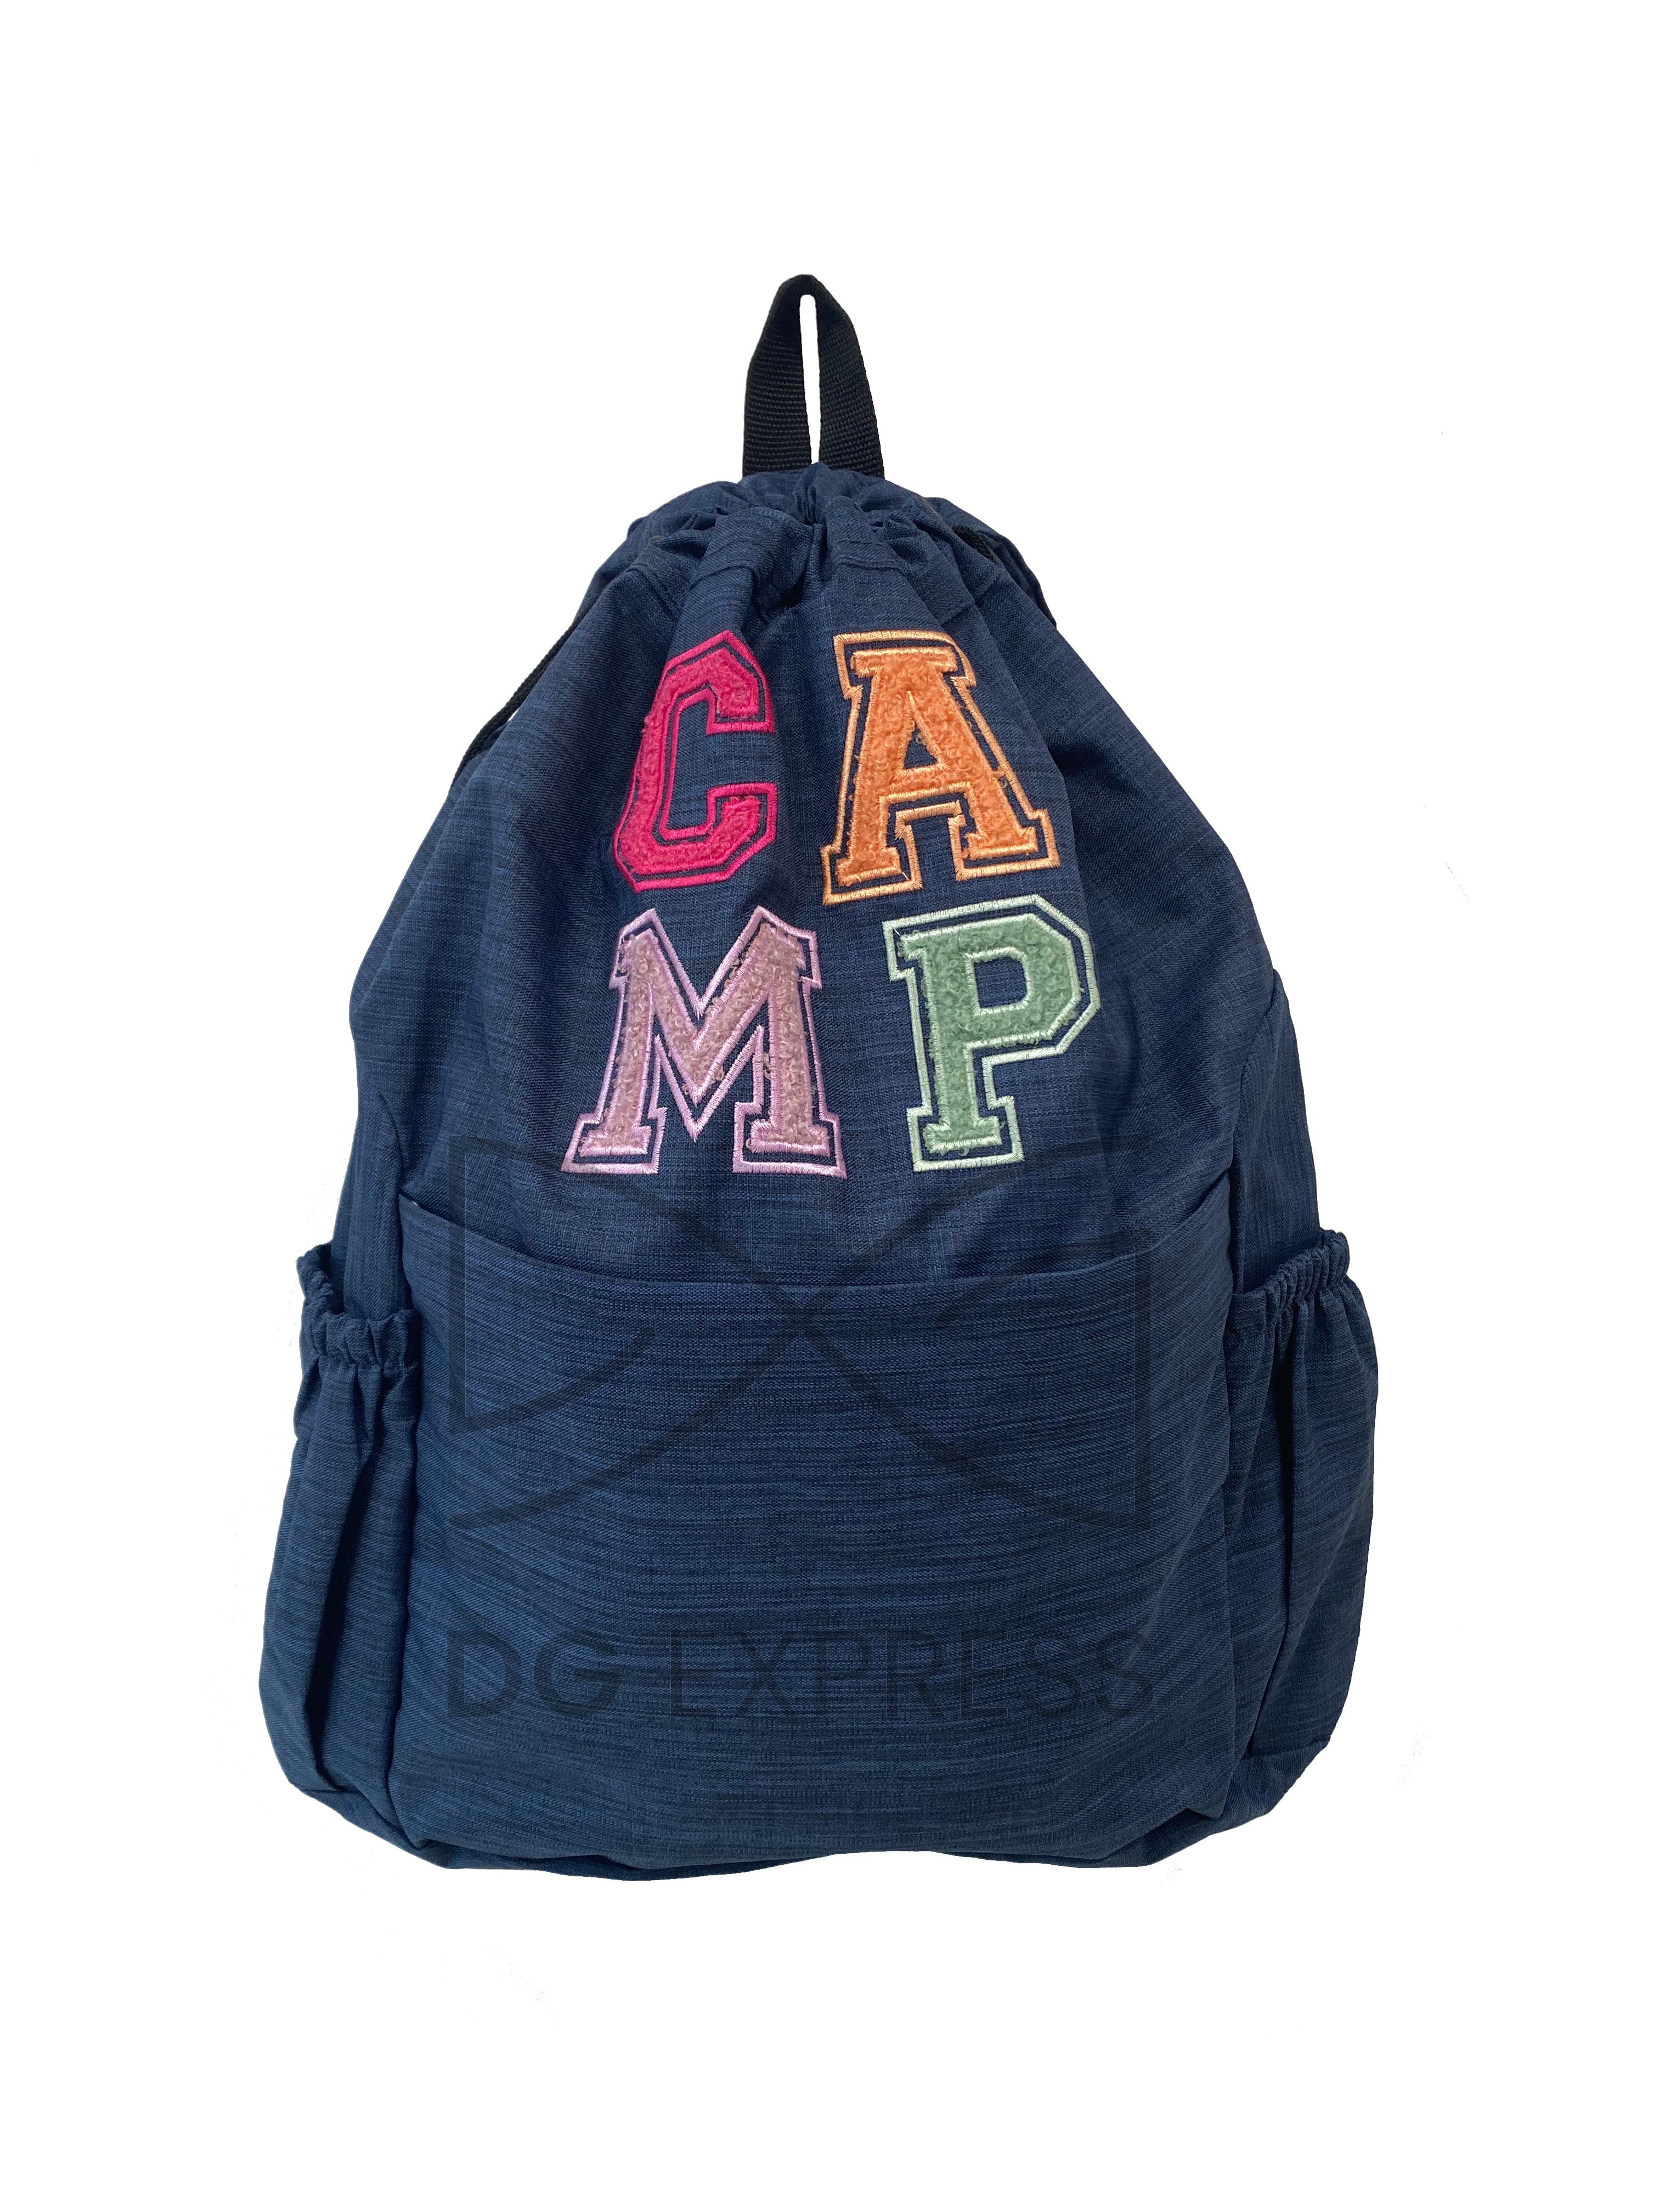 Mayim Girl's Fuzzy Letter Backpack